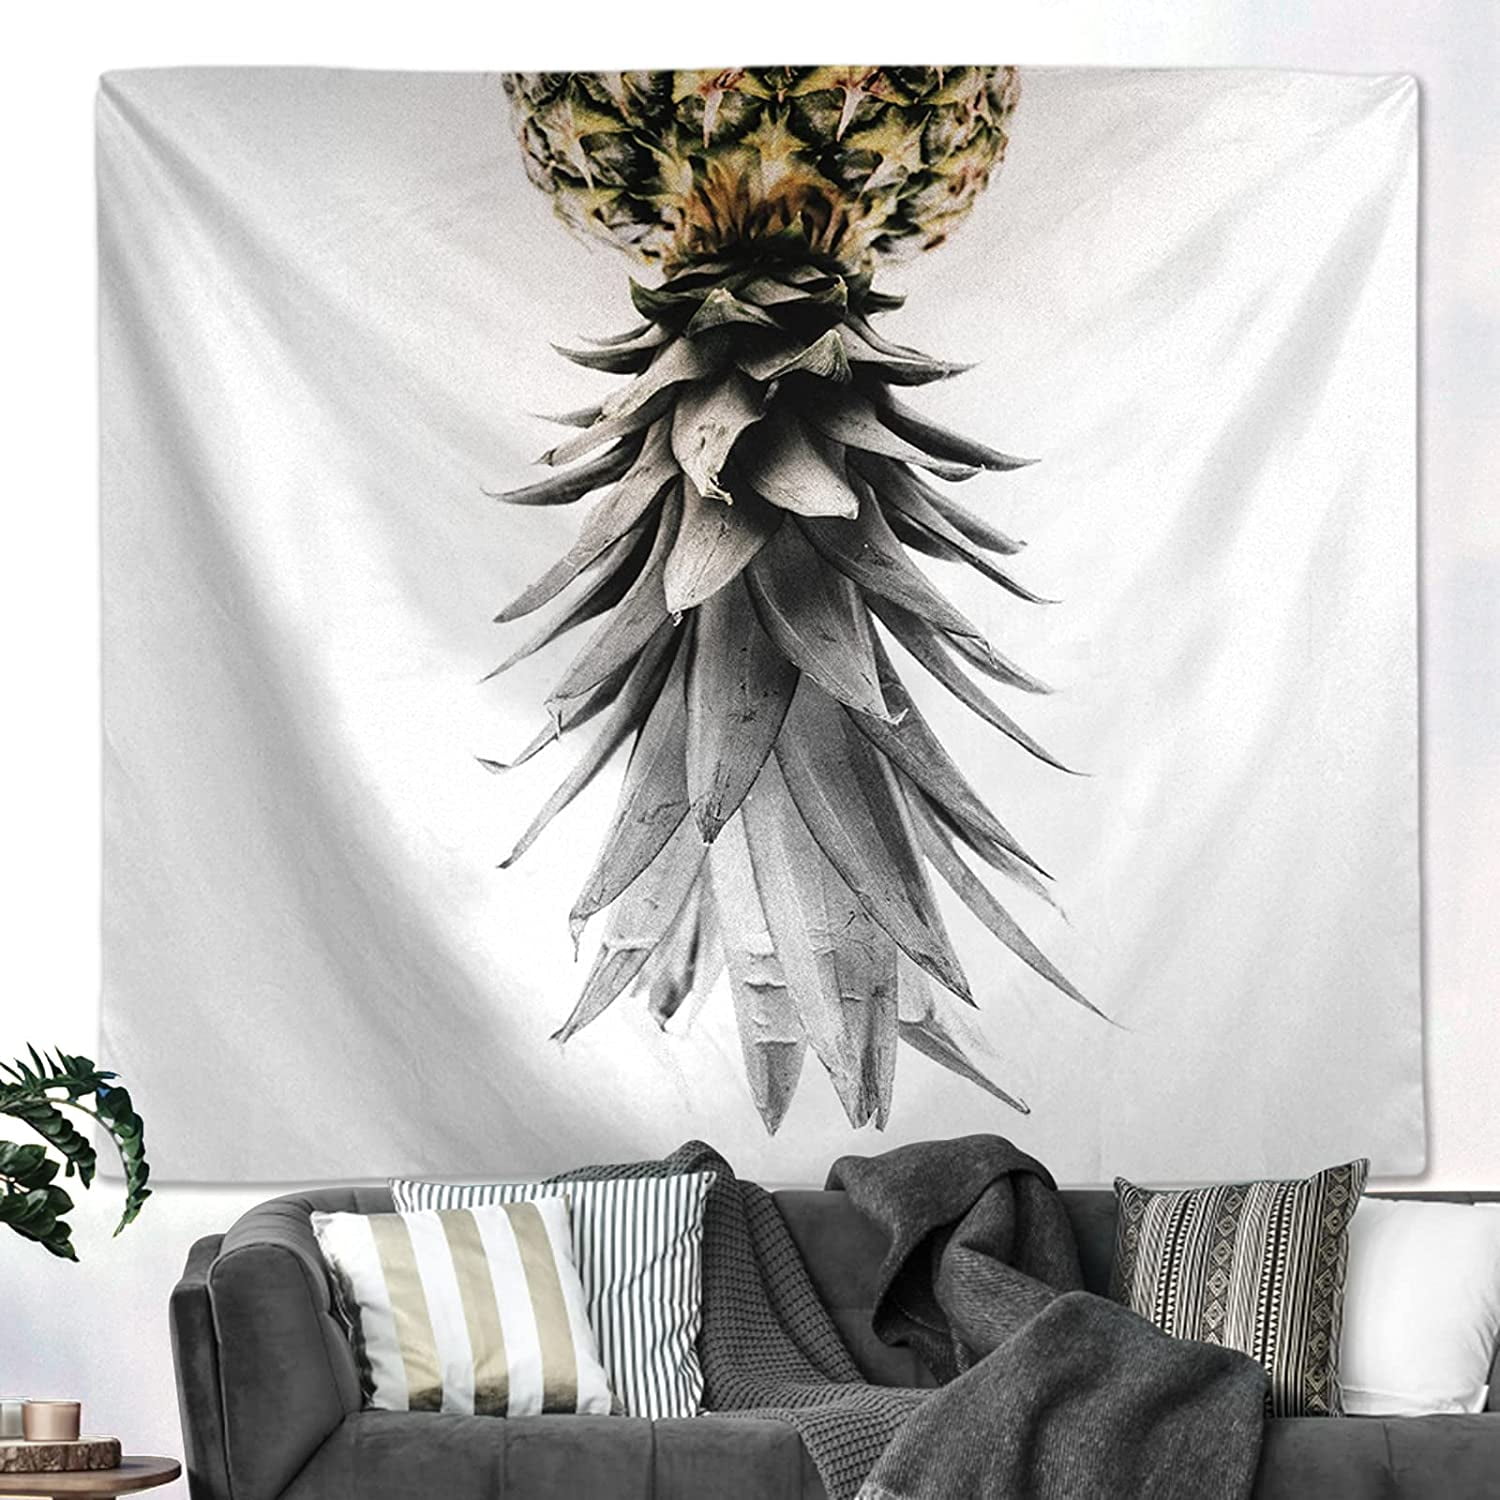 Psychedelic Tapestries Tropical Wall Bedroom Home Decor Yeacun Grey Pineapple Tapestry Wall Hanging Tropical Plants Tapestry 60L x 50W inches/150 x 130 cms